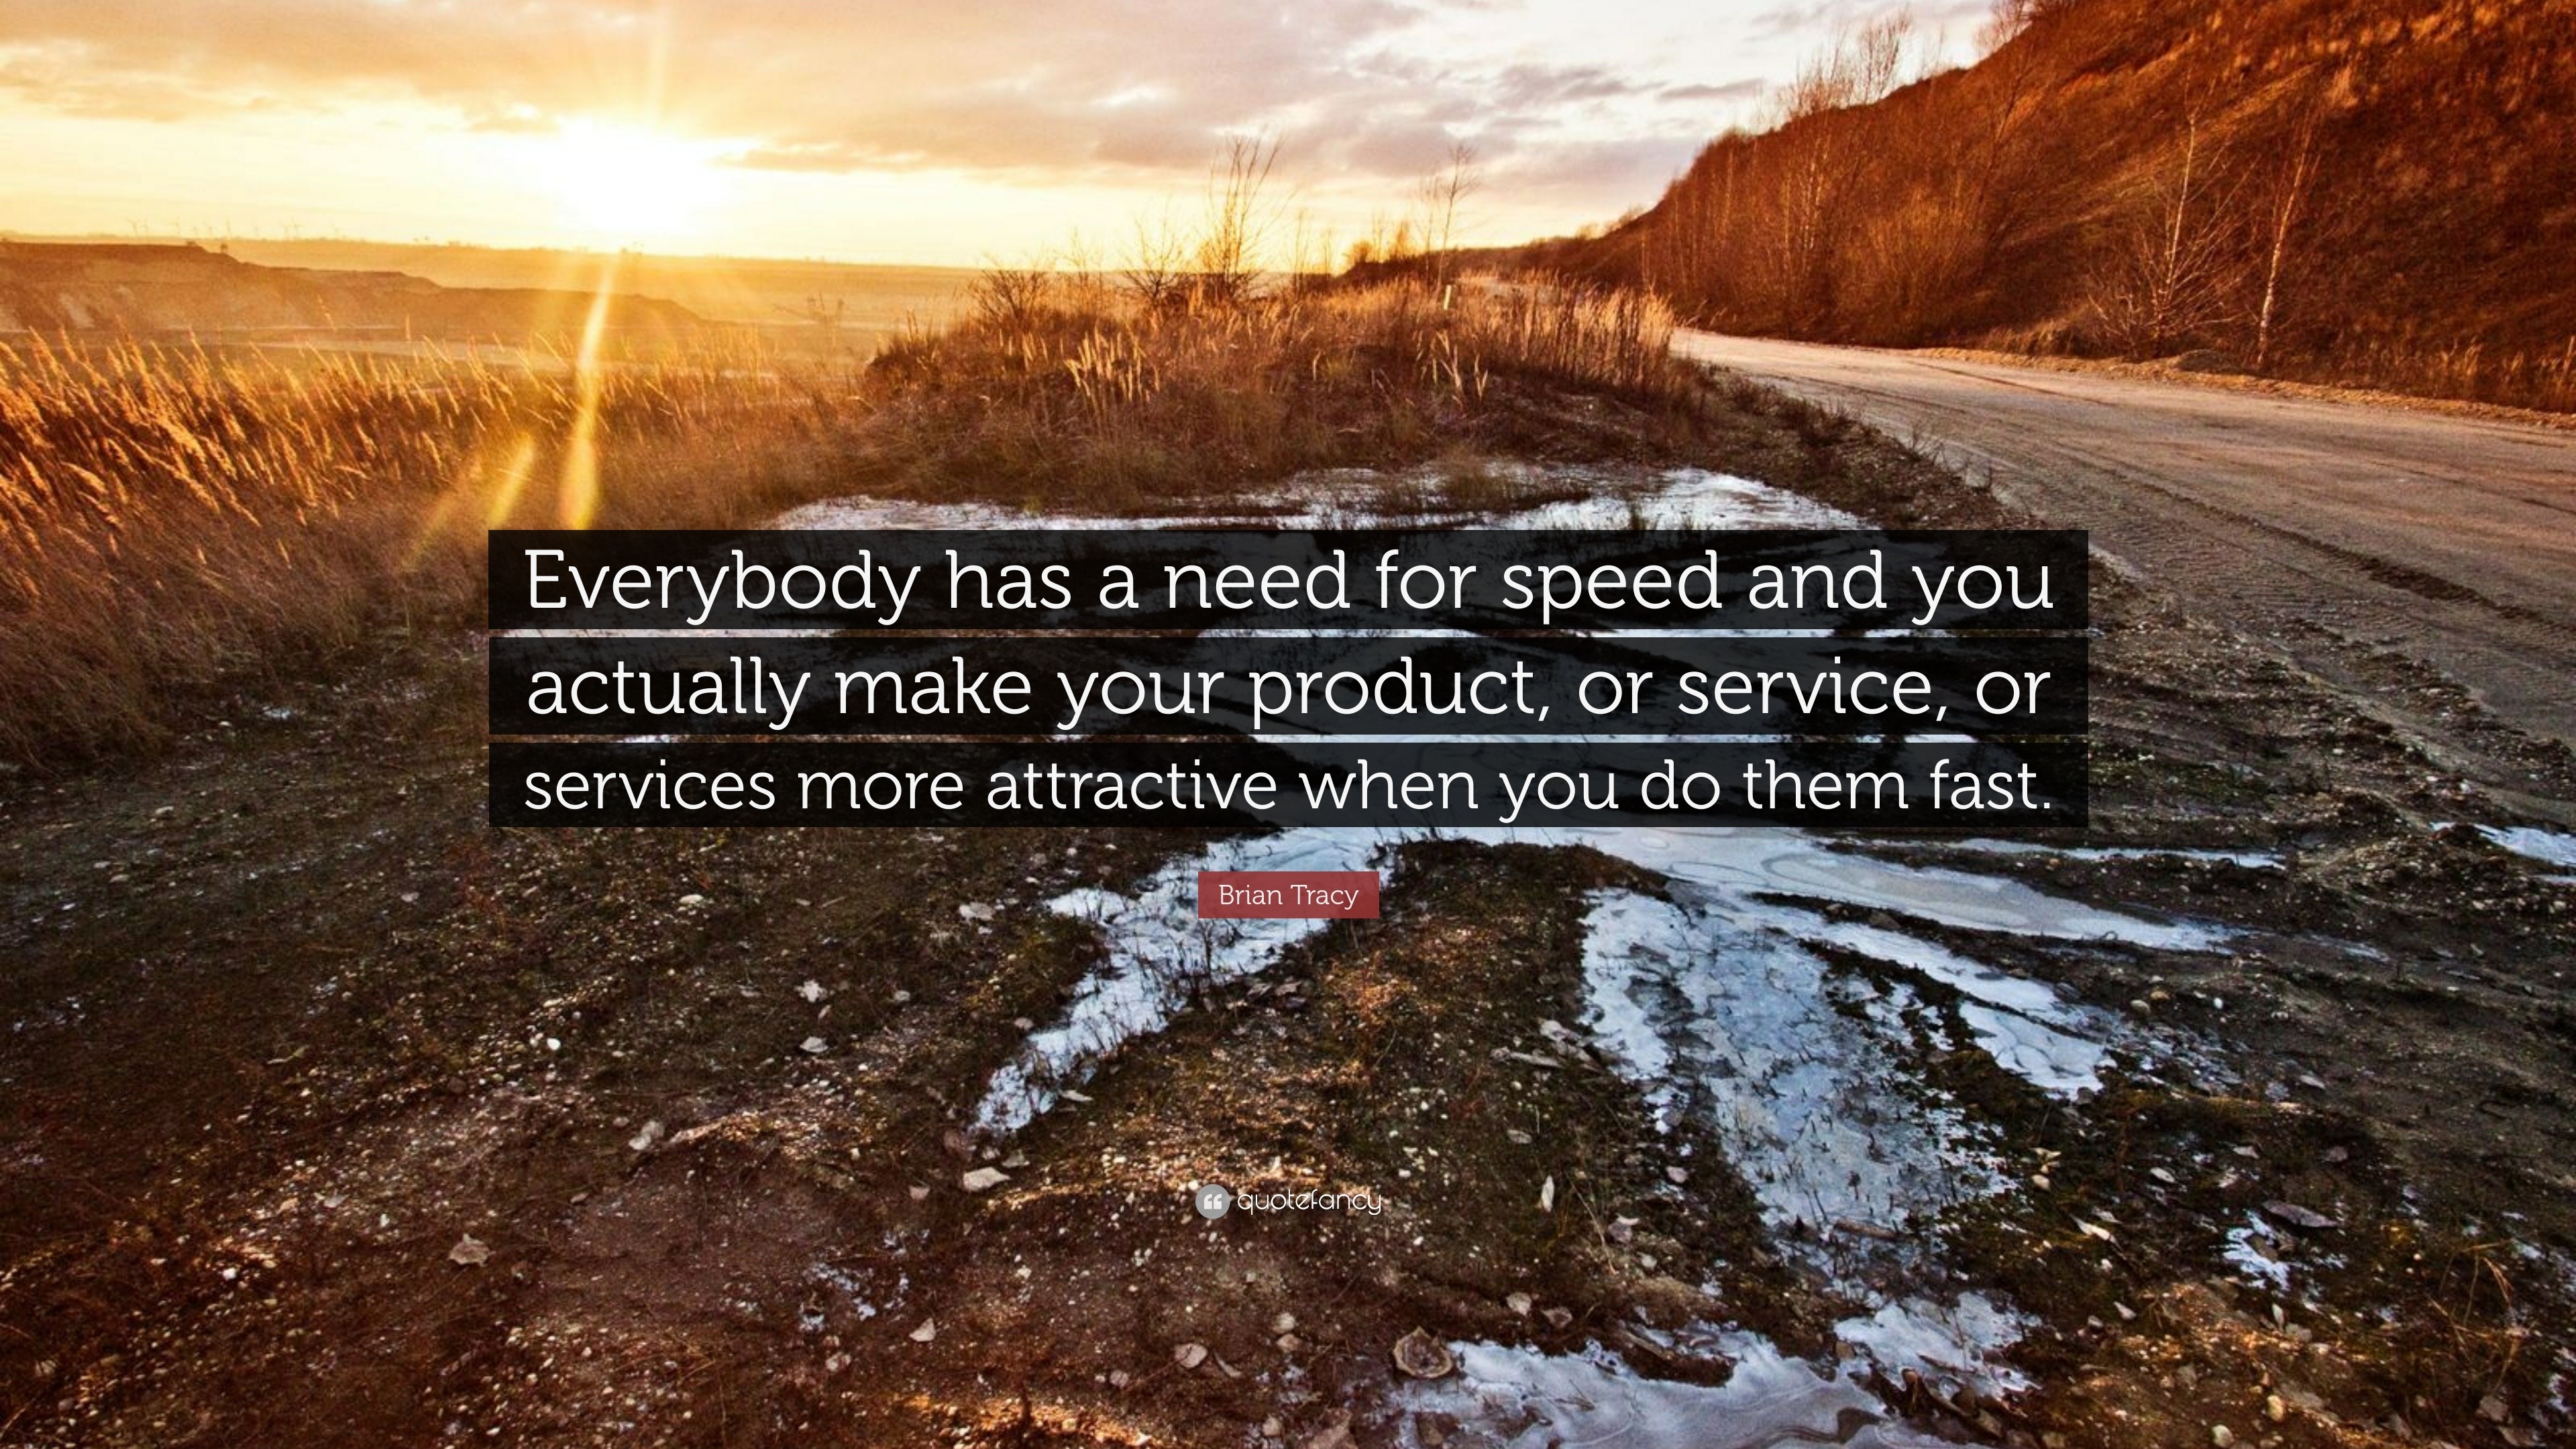 Brian Tracy Quote: “Everybody has a need for speed and you actually make  your product, or service, or services more attractive when you do t”